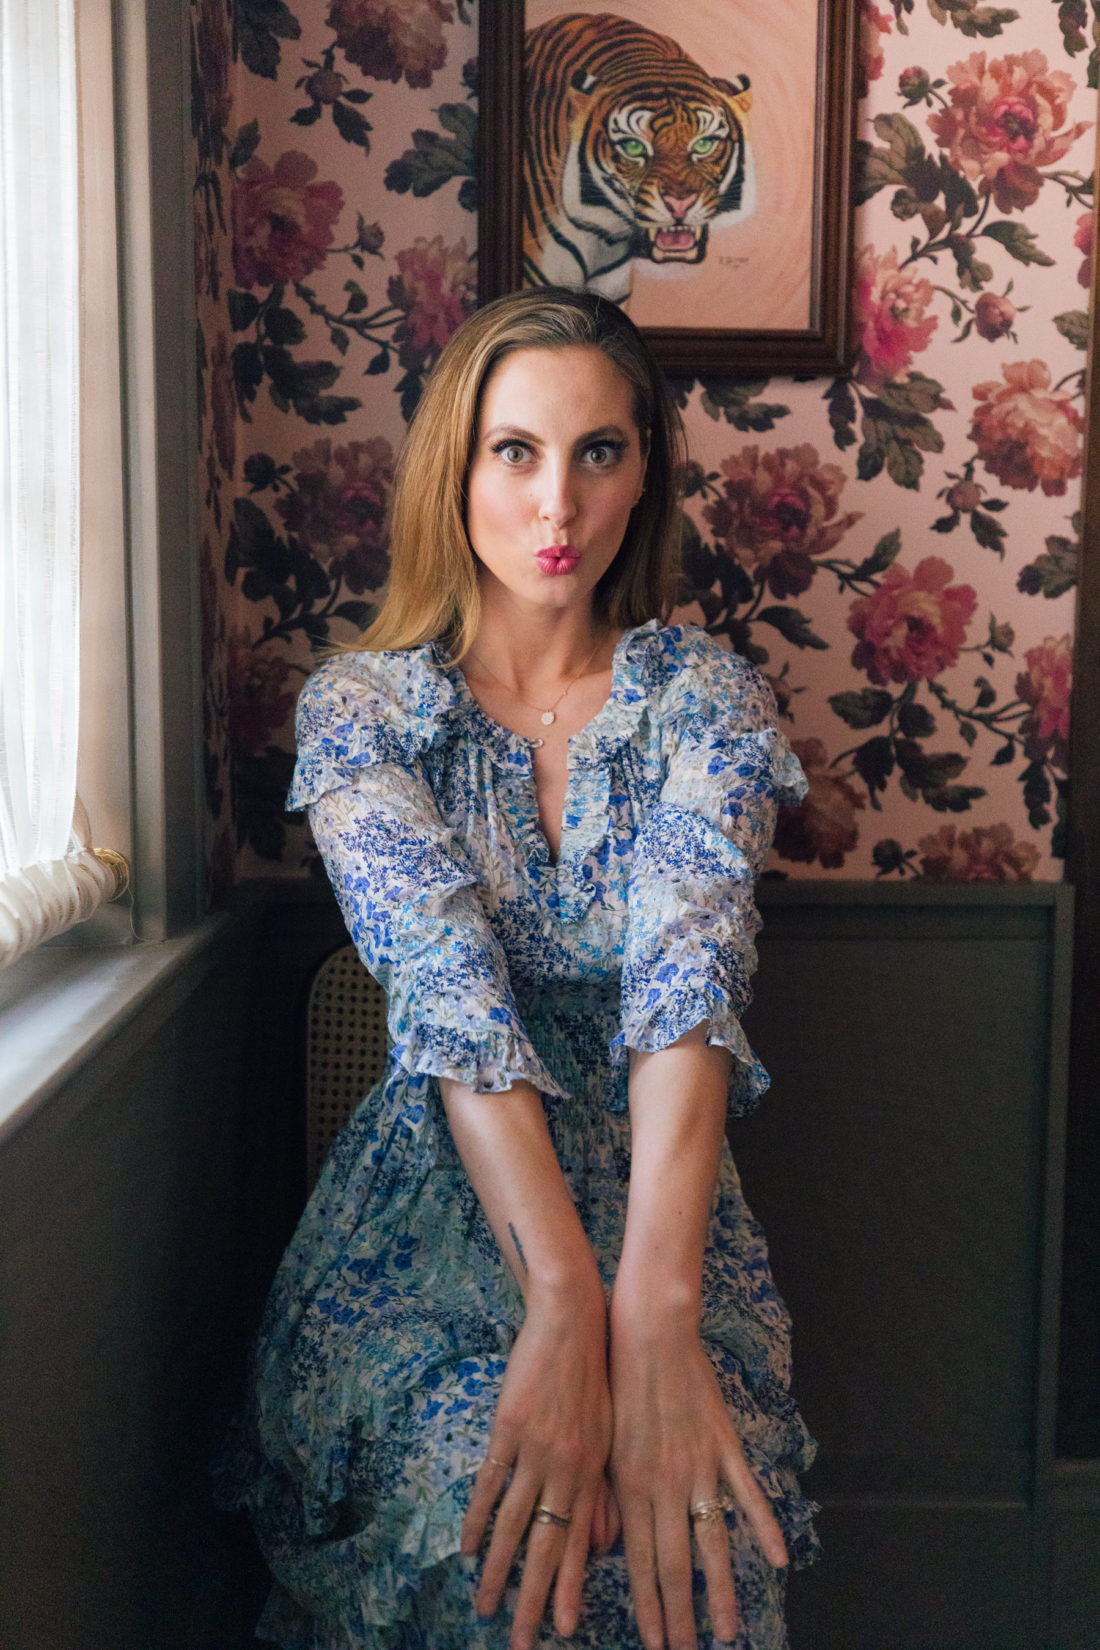 Eva Amurri Martino sits in a floral dress in front of peony wallpaper at the Clermont Hotel